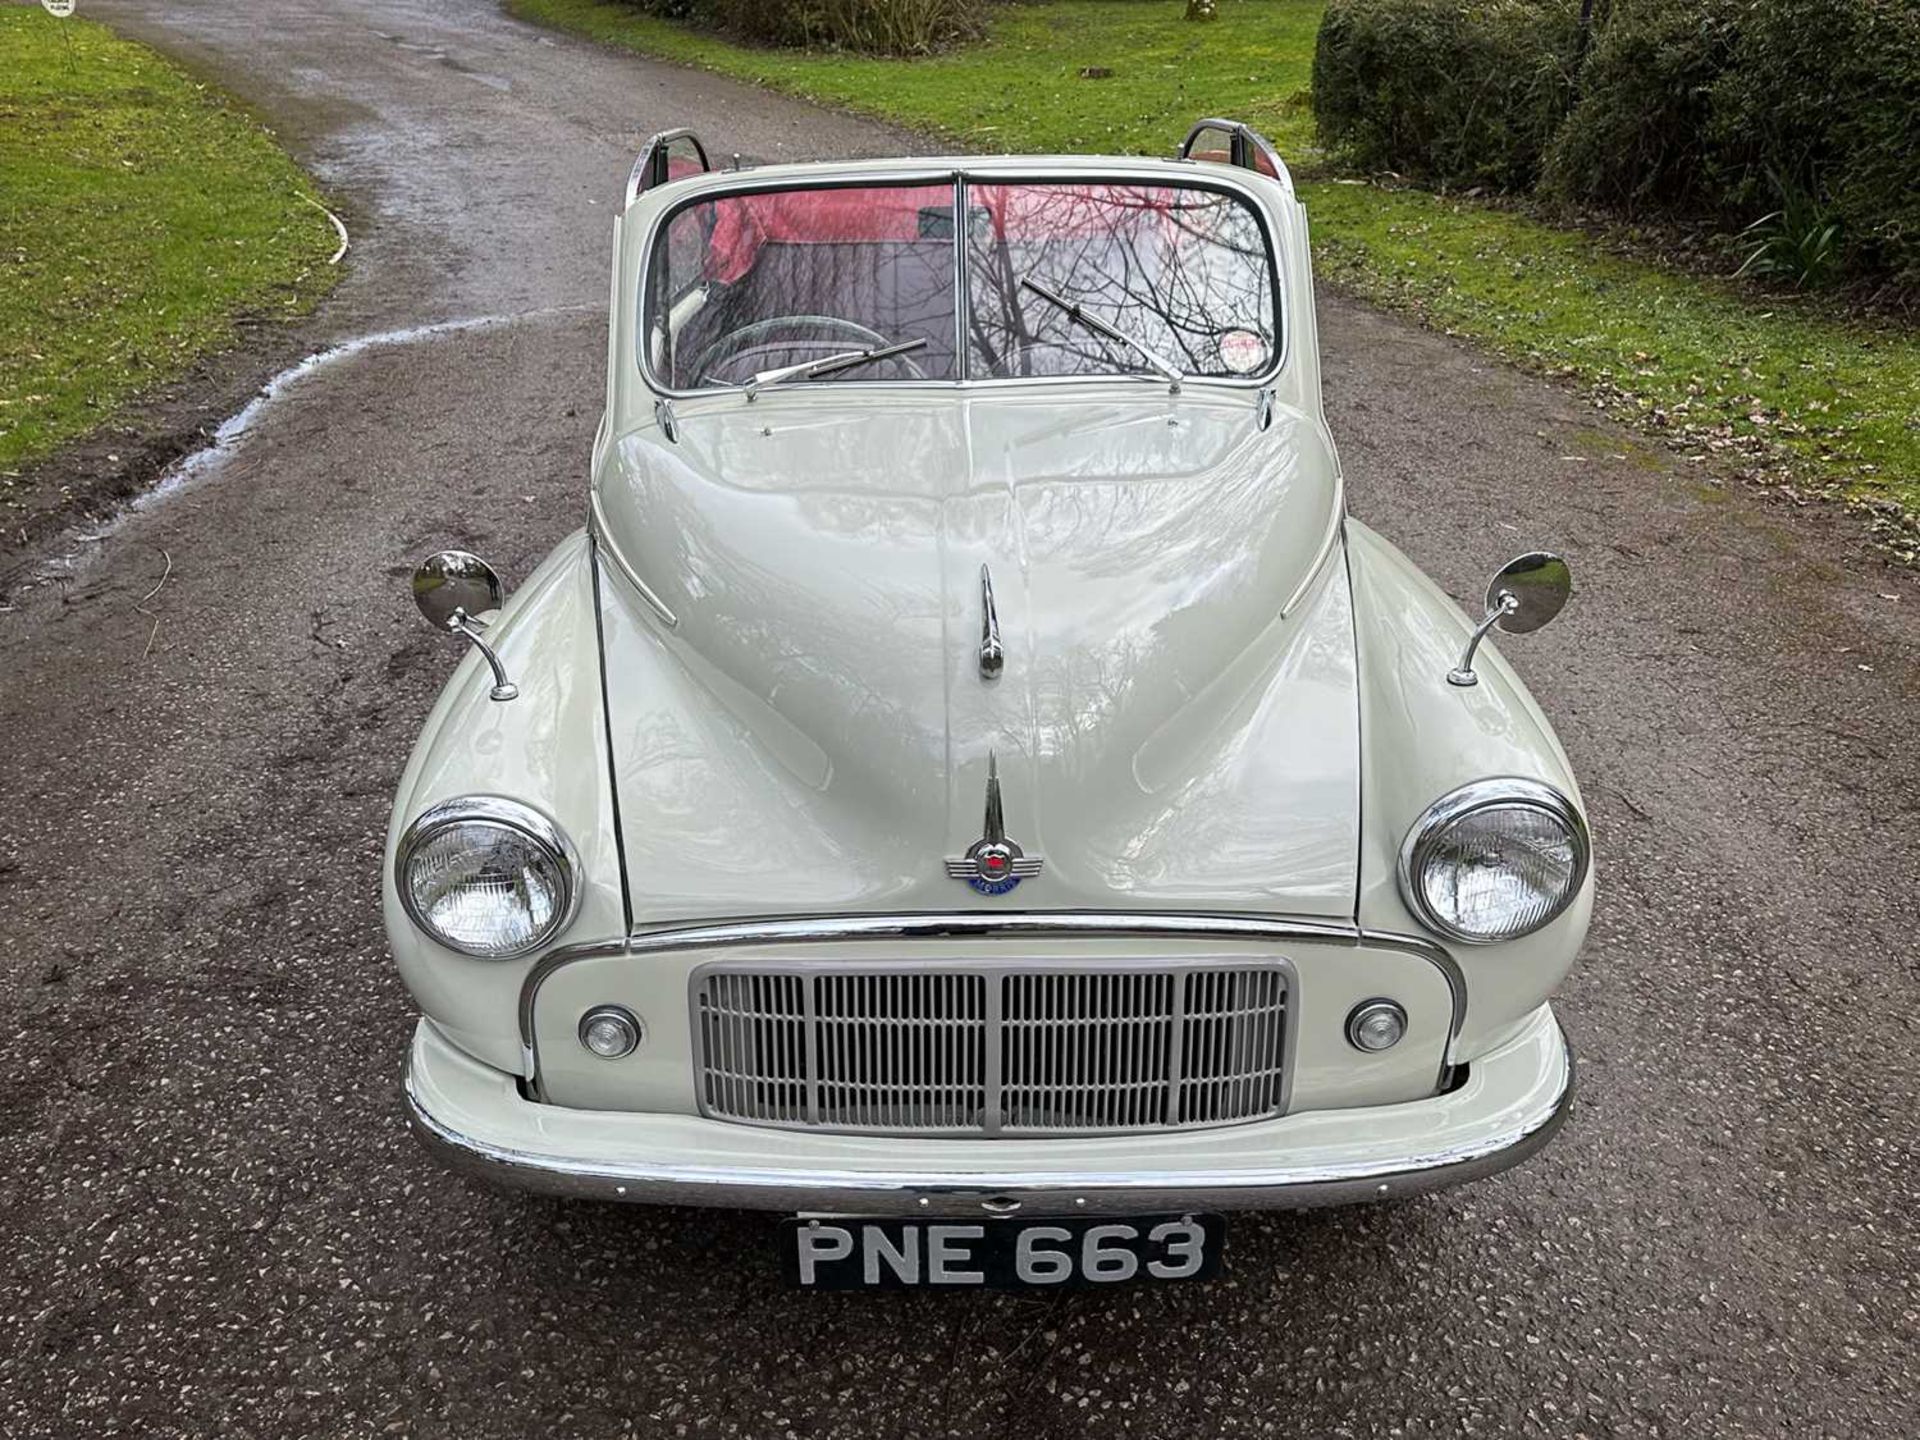 1954 Morris Minor Tourer Fully restored to concours standard - Image 18 of 100